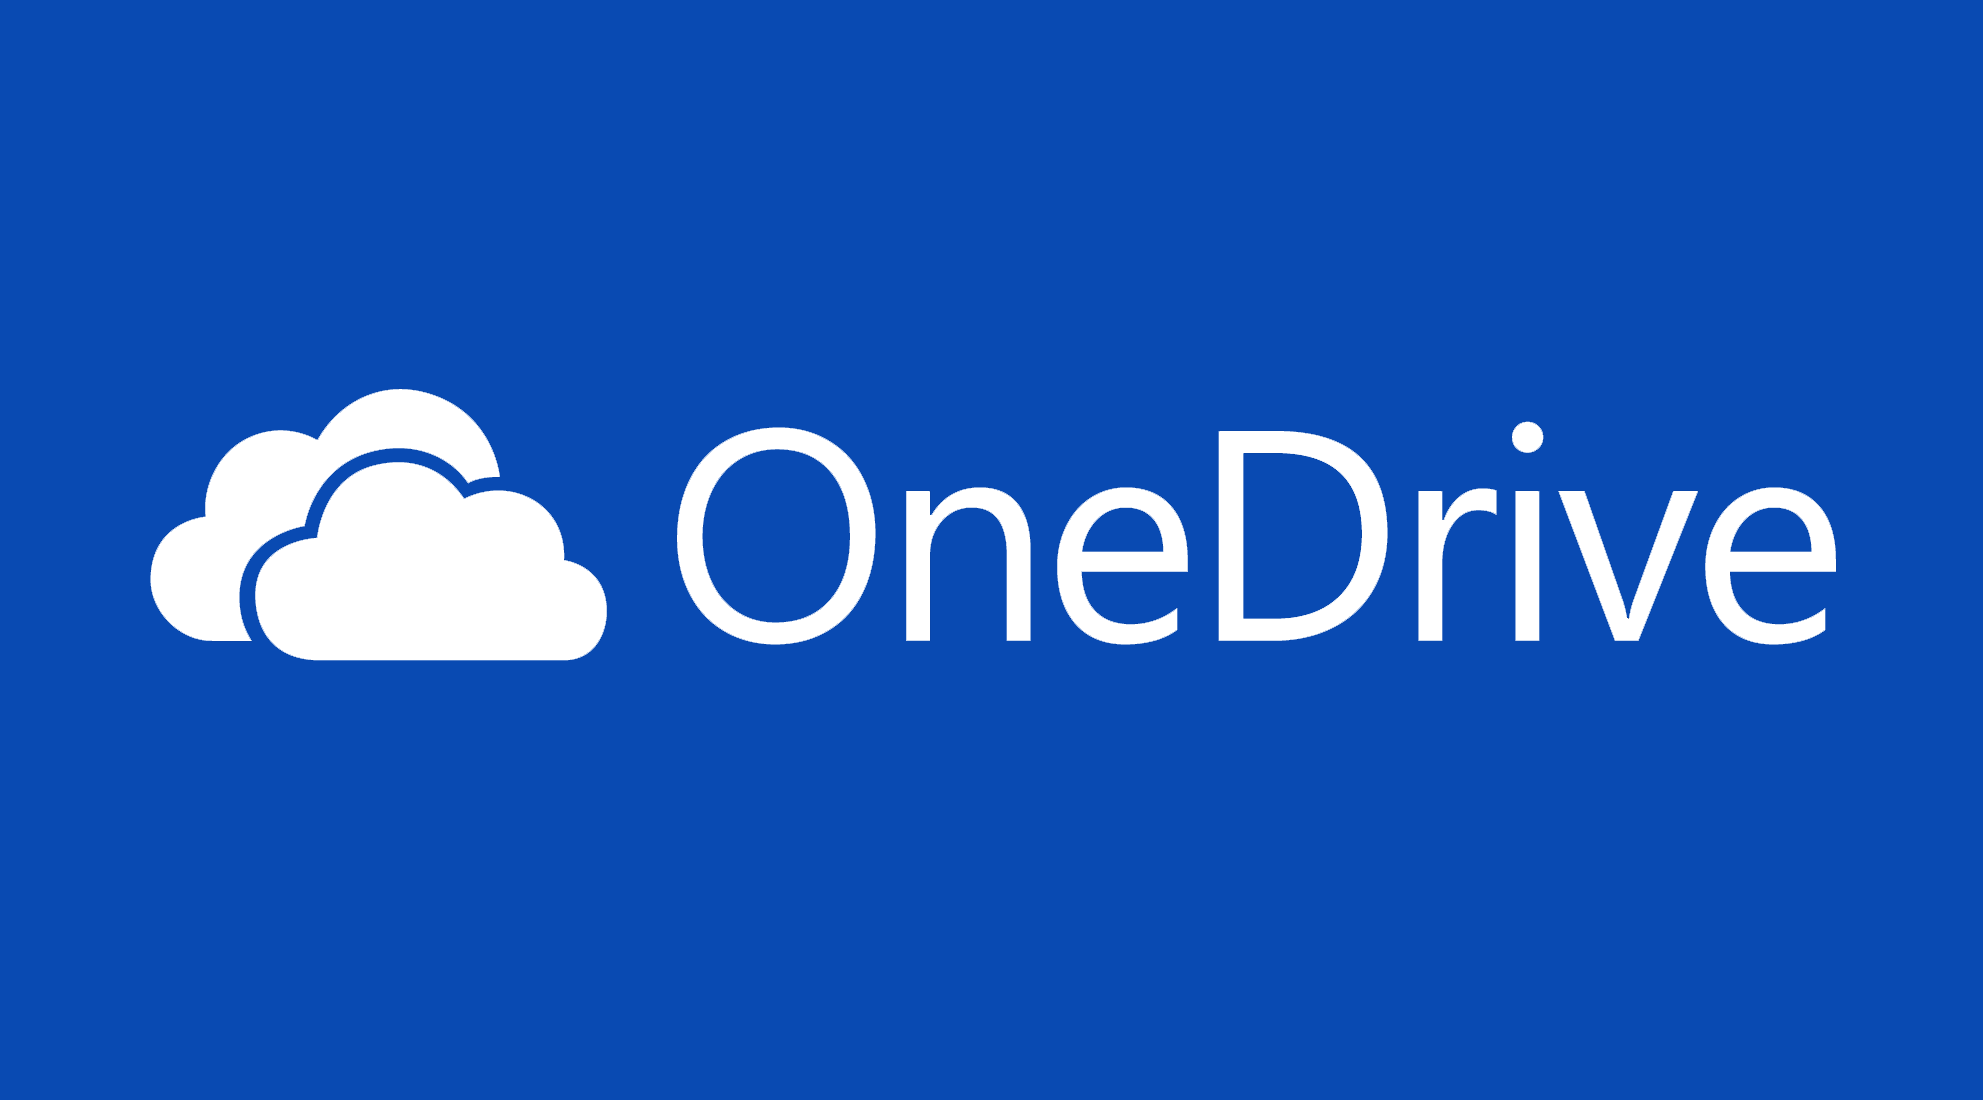 How To Completely Uninstall Onedrive On Windows 10